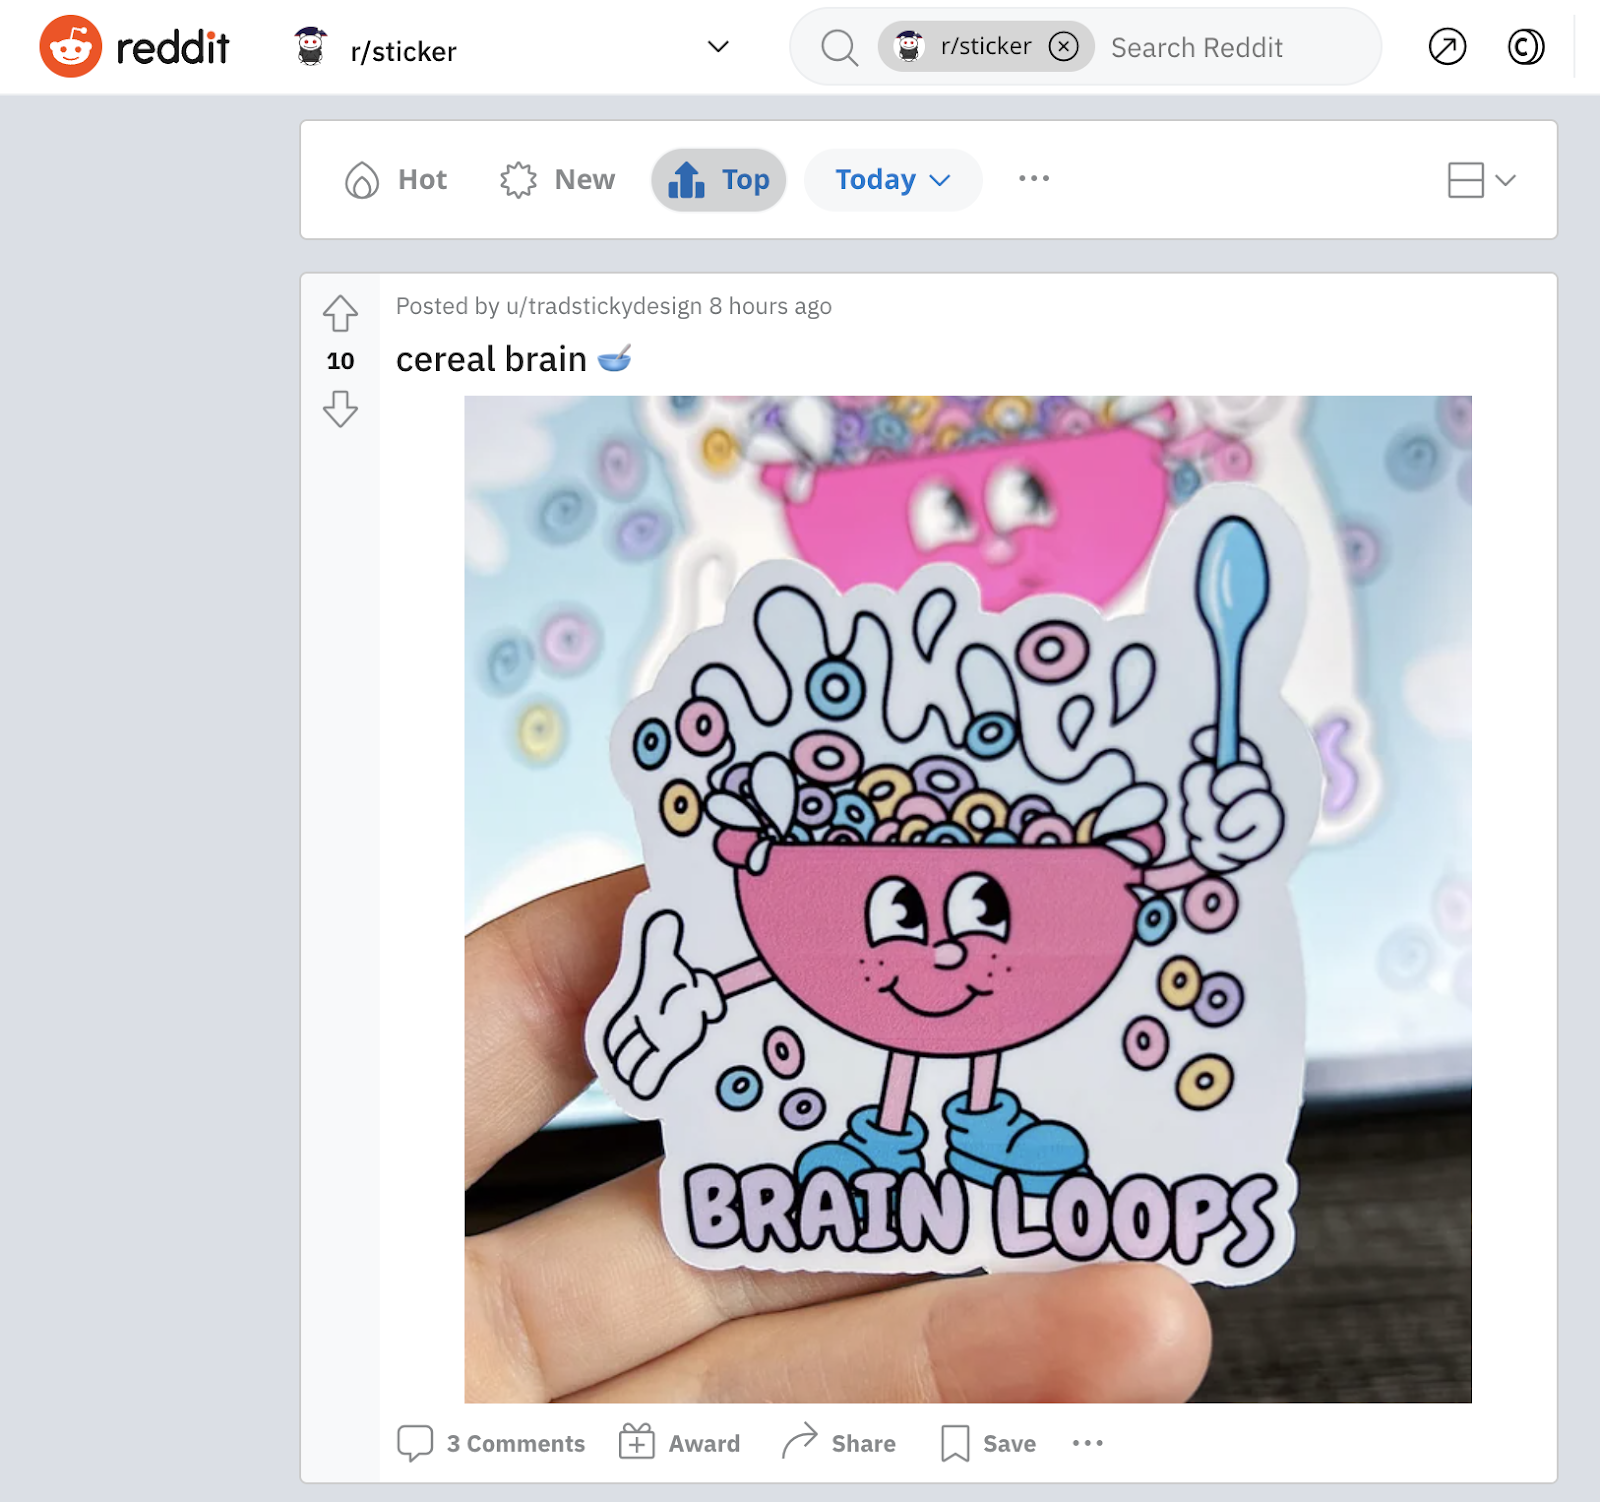 Engage with sticker and art lover communities on Reddit